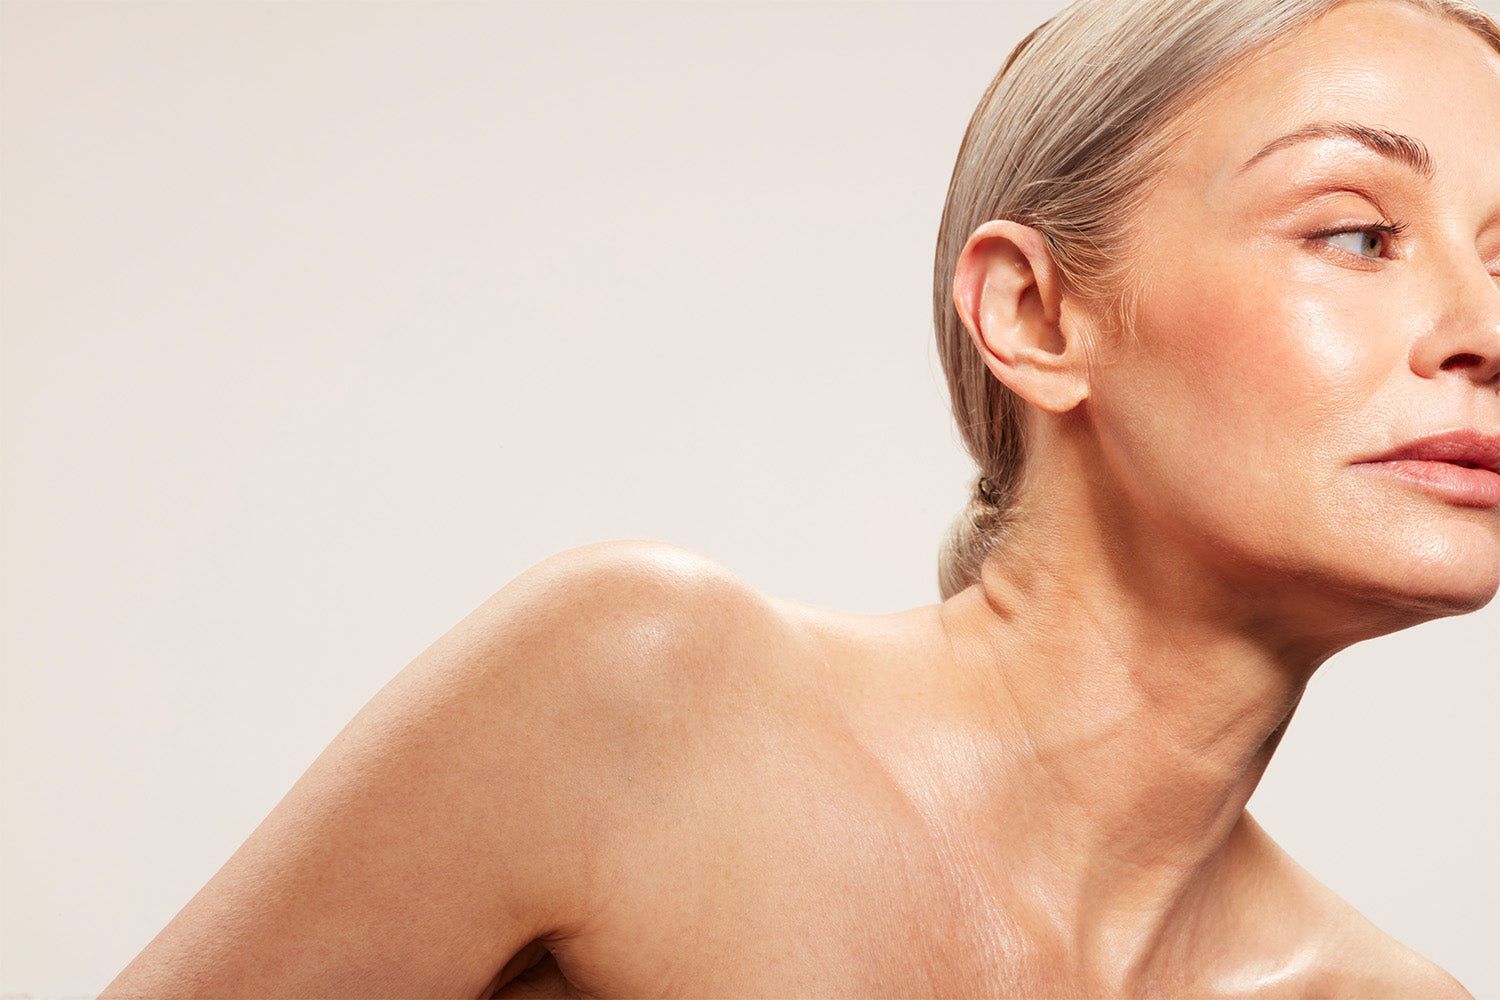 7 Techniques To Get Rid of Neck Wrinkles